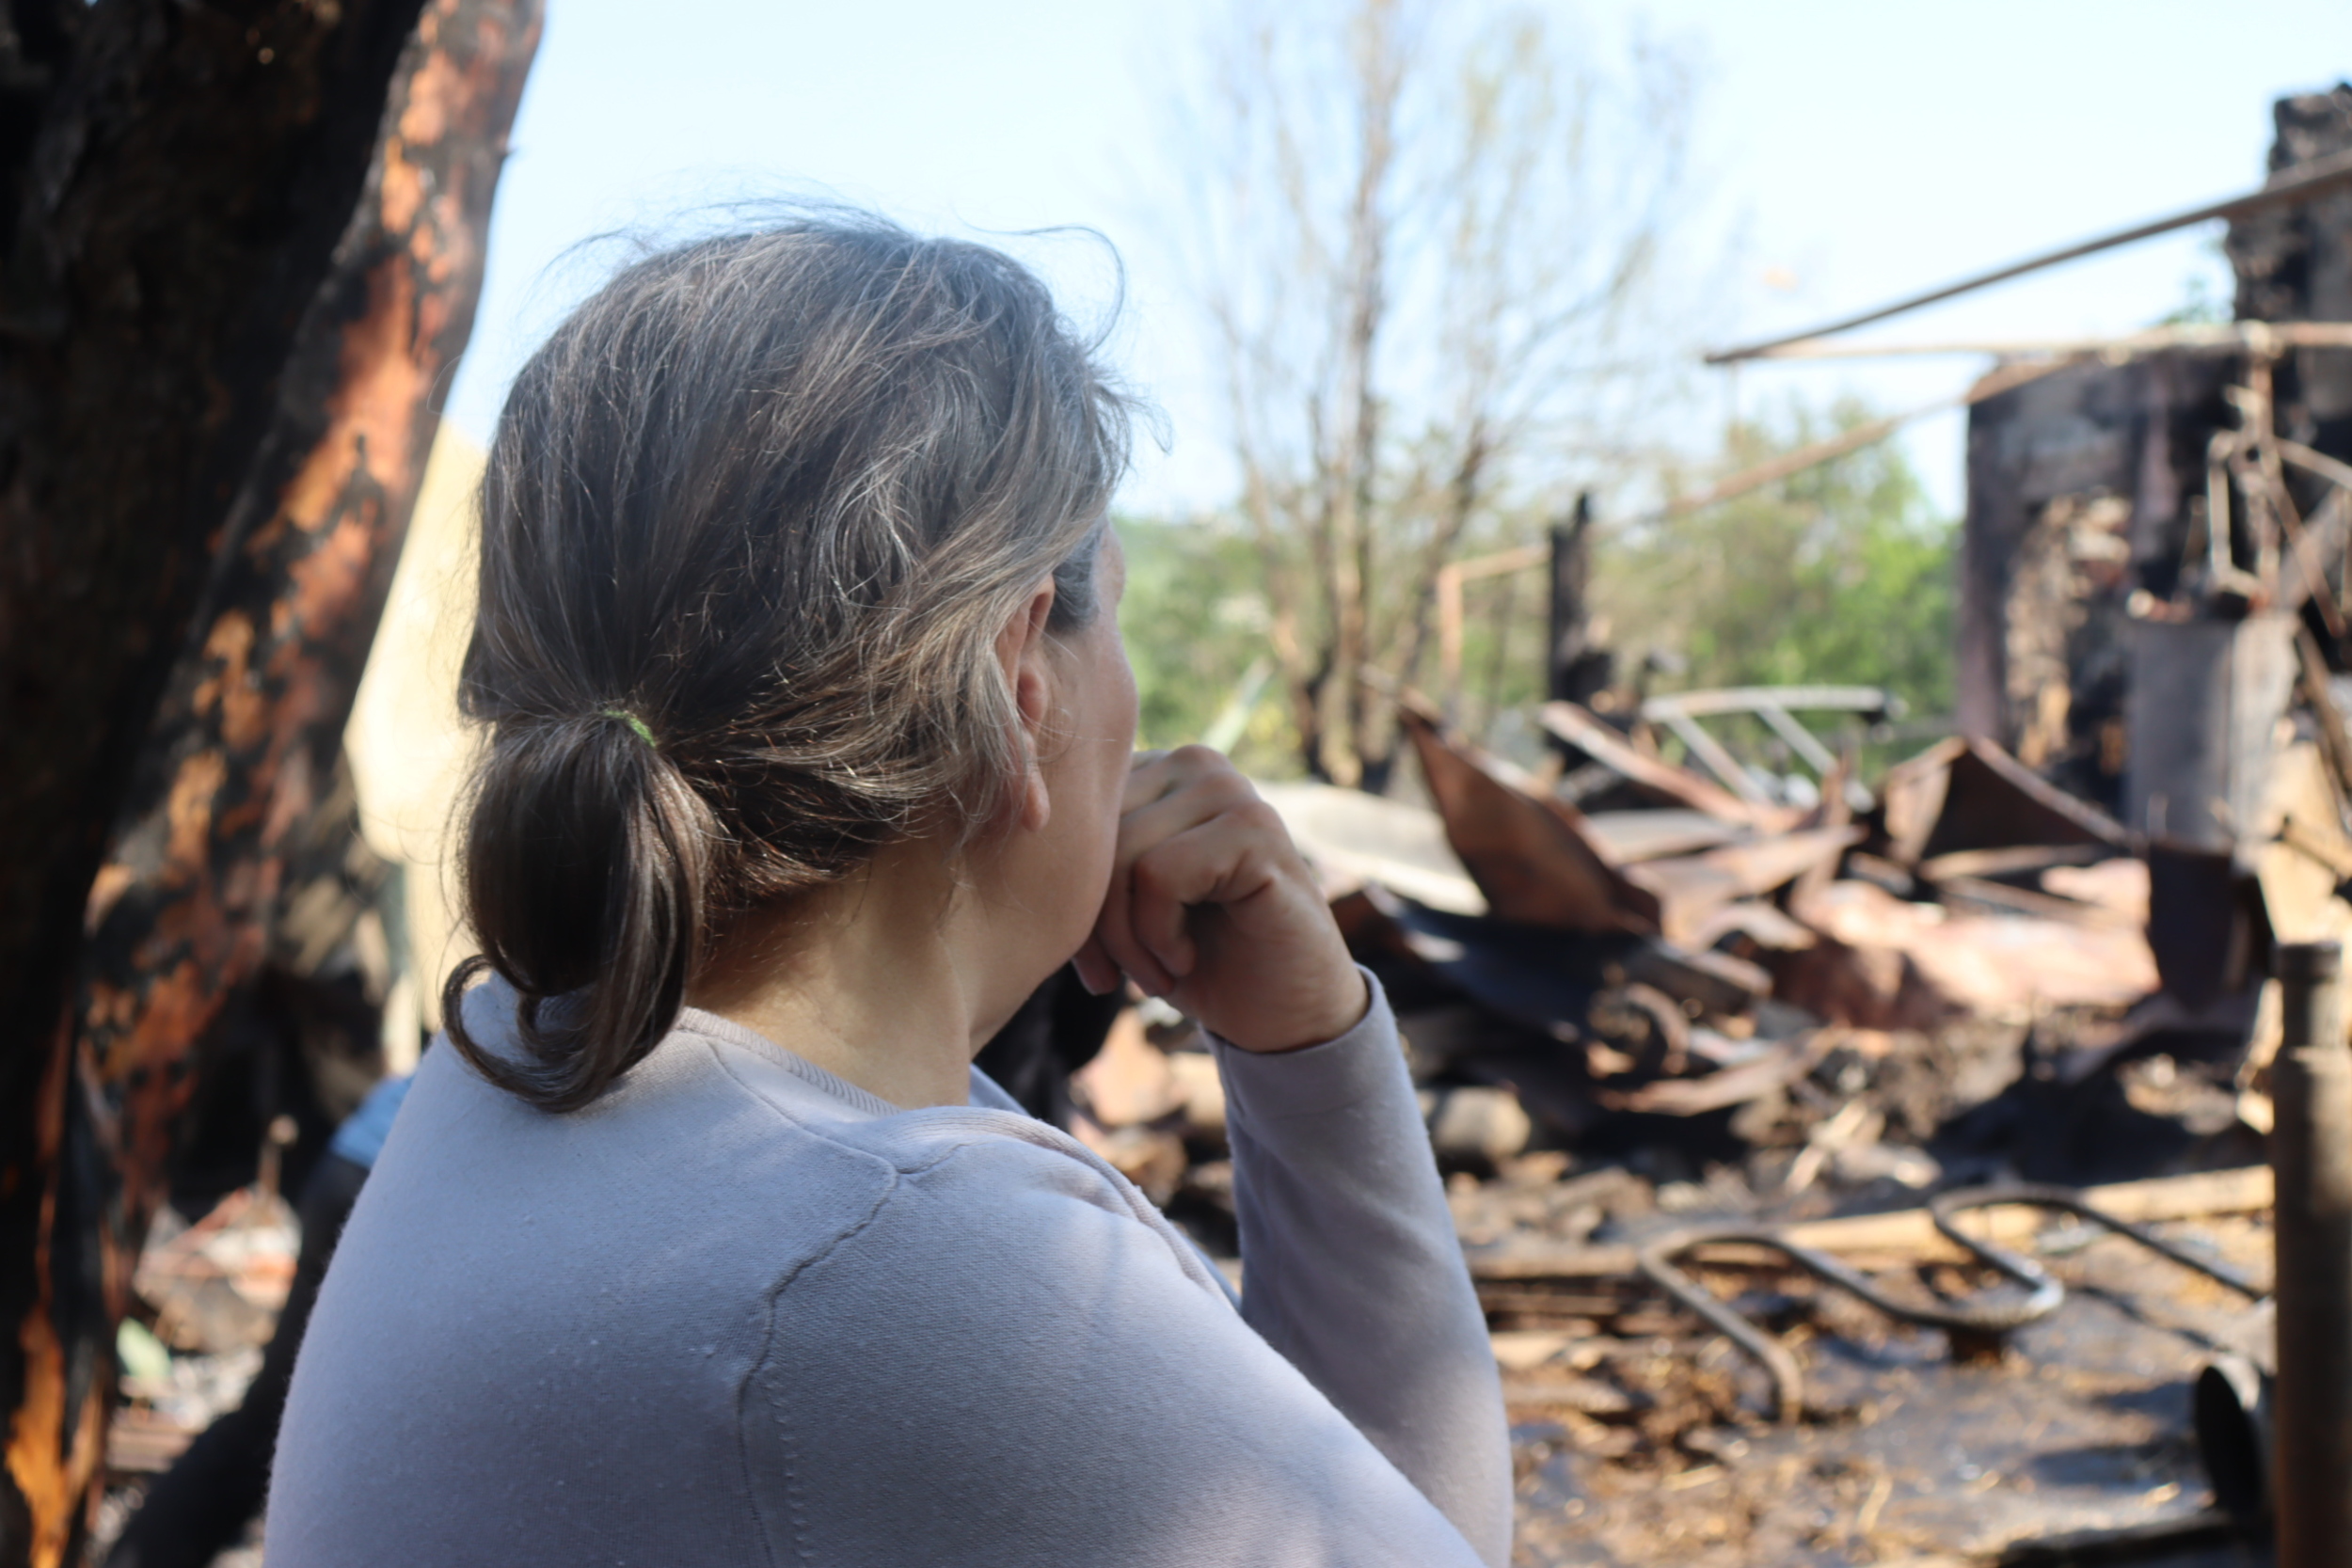 Olena from Kulynychi, a village Russia attacked with a drone strike on May 21, 2024 / Photo: Yana Sliemzina for Gwara Media